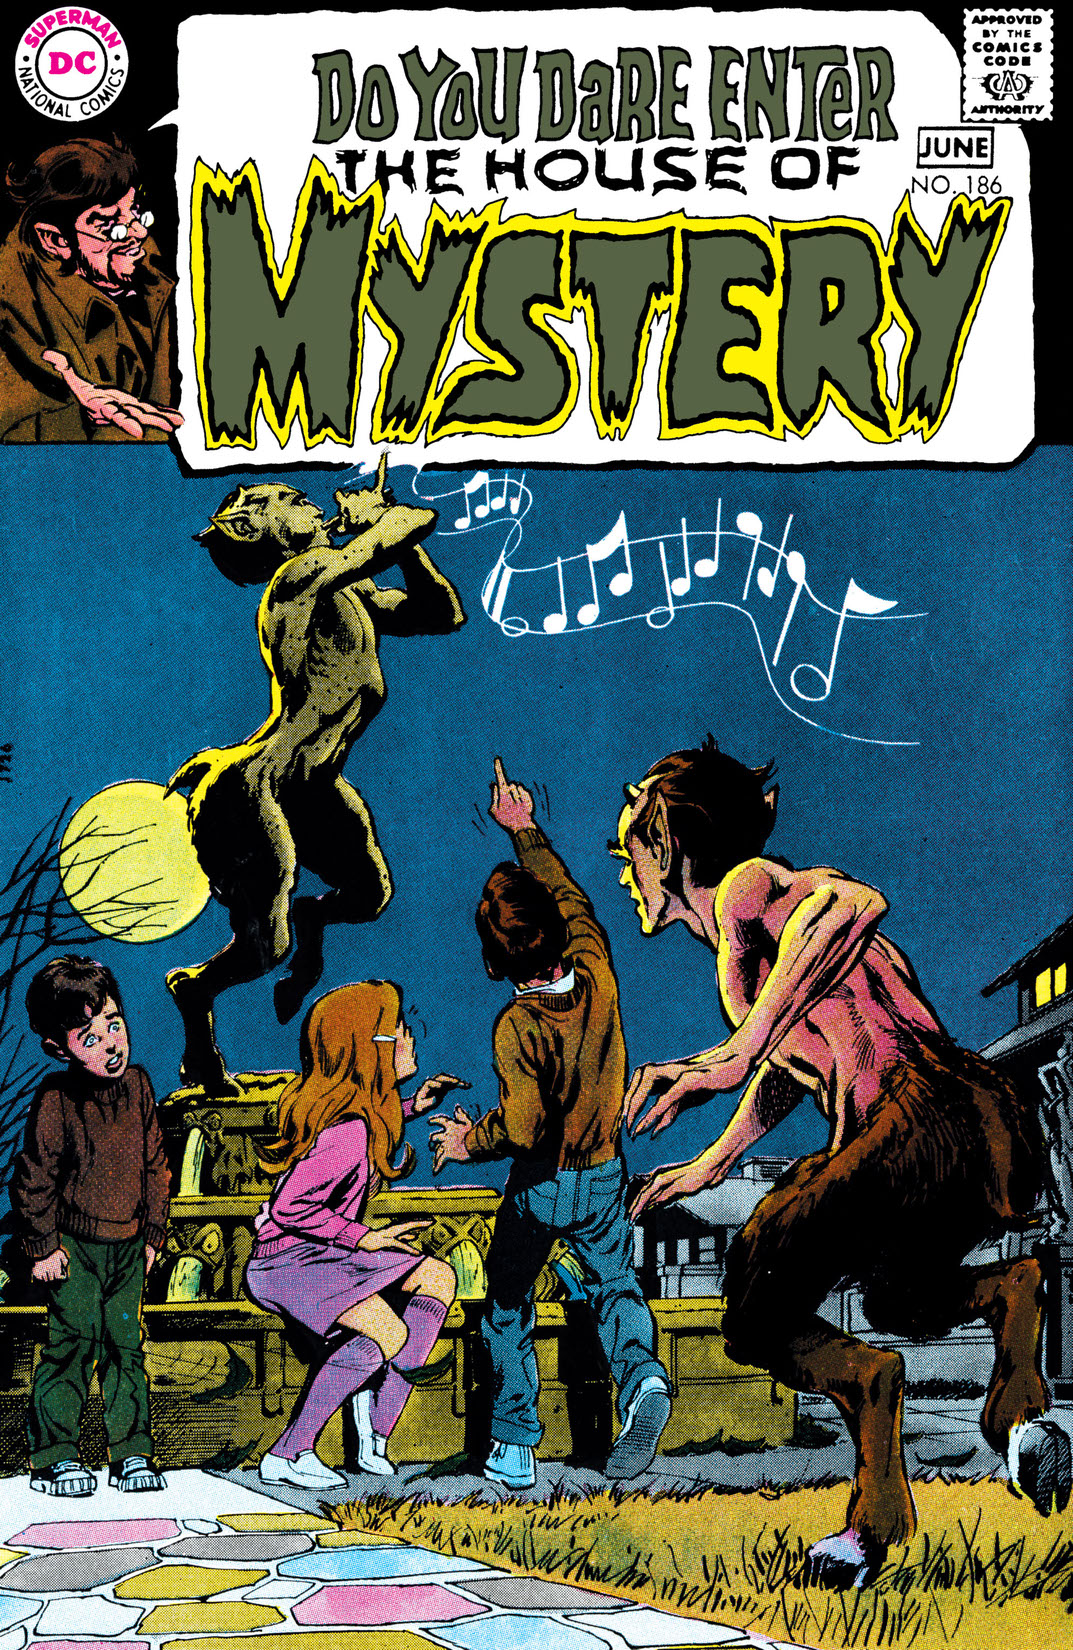 House of Mystery (1951-) #186 preview images